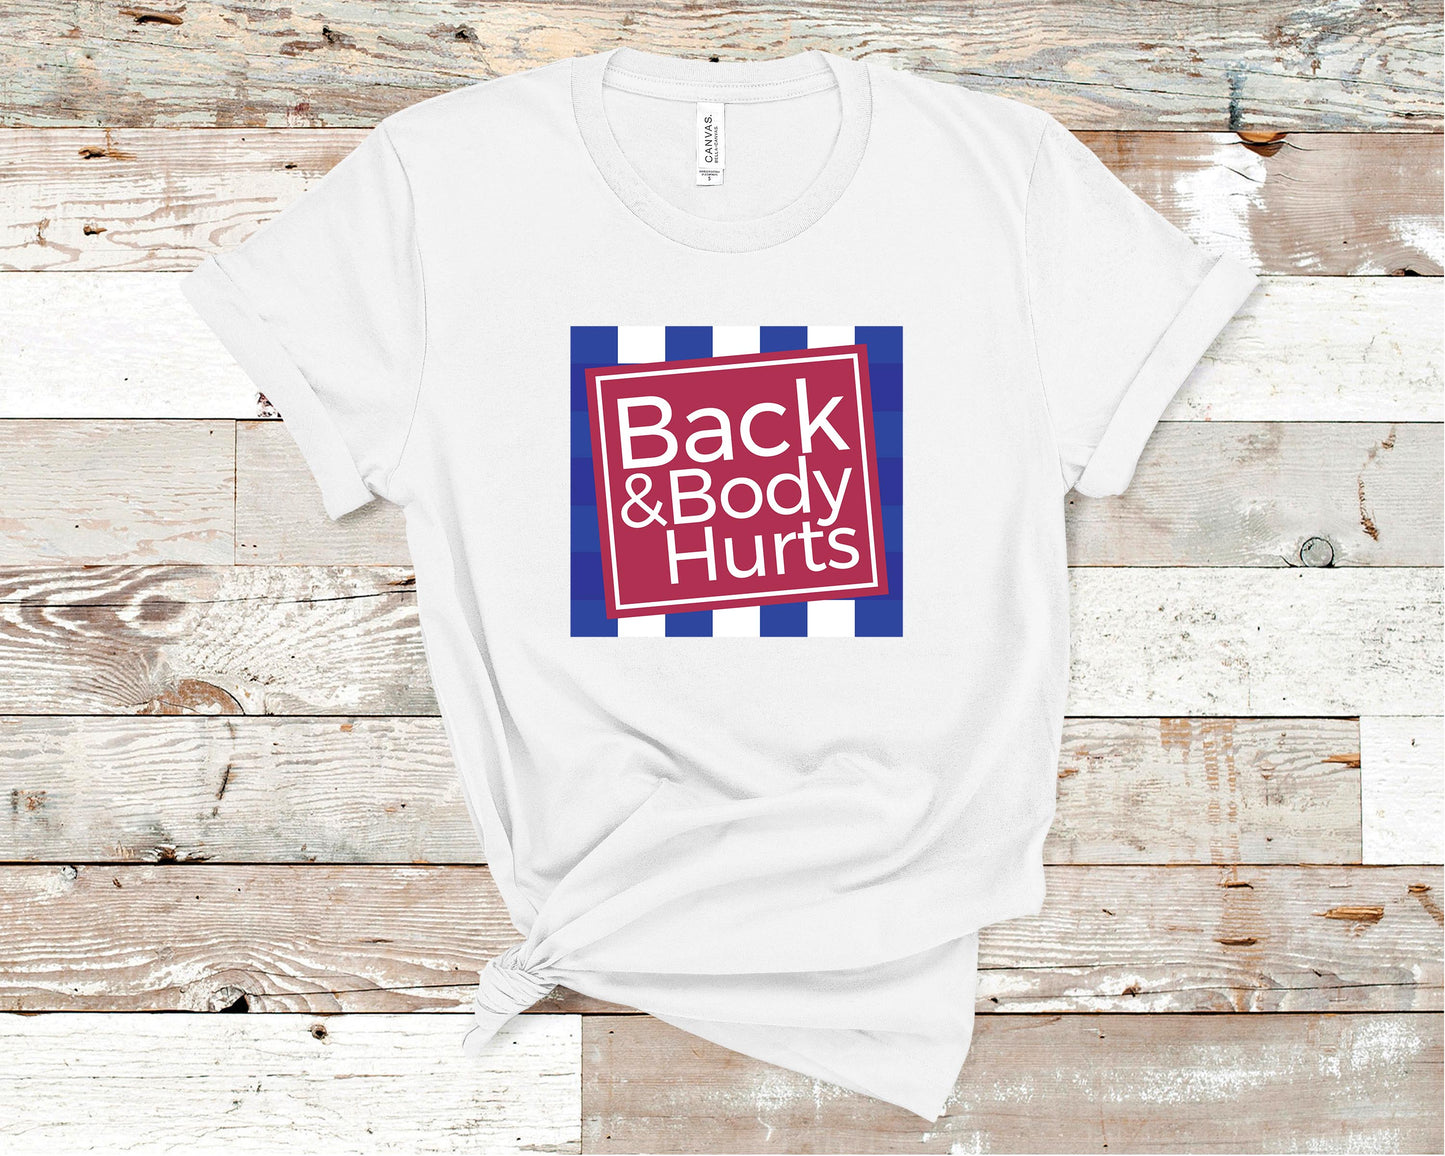 Back & Body Hurts - Fitness